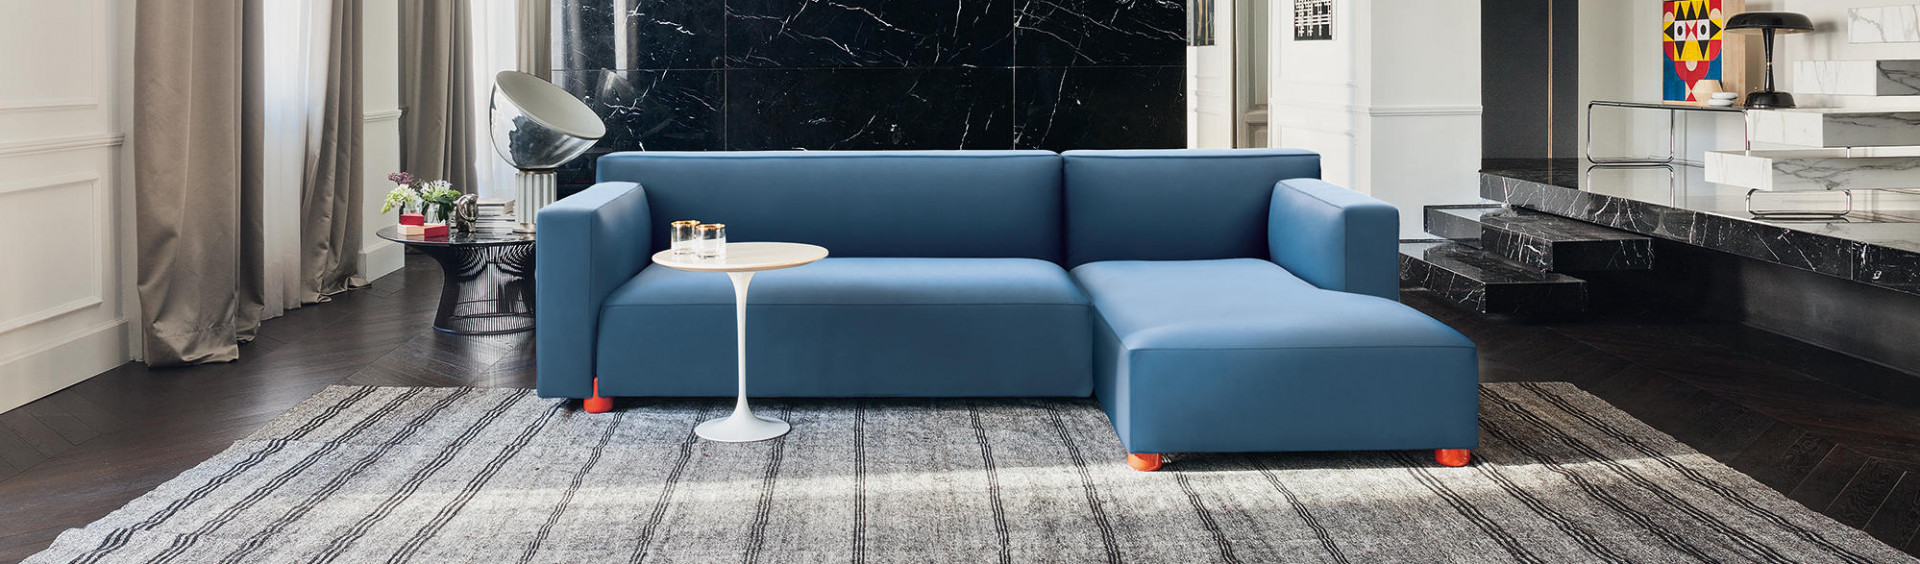 Synes Nødvendig Algebraisk Knoll - Sofa Collection by Edward Barber and Jay Osgerby | cre8